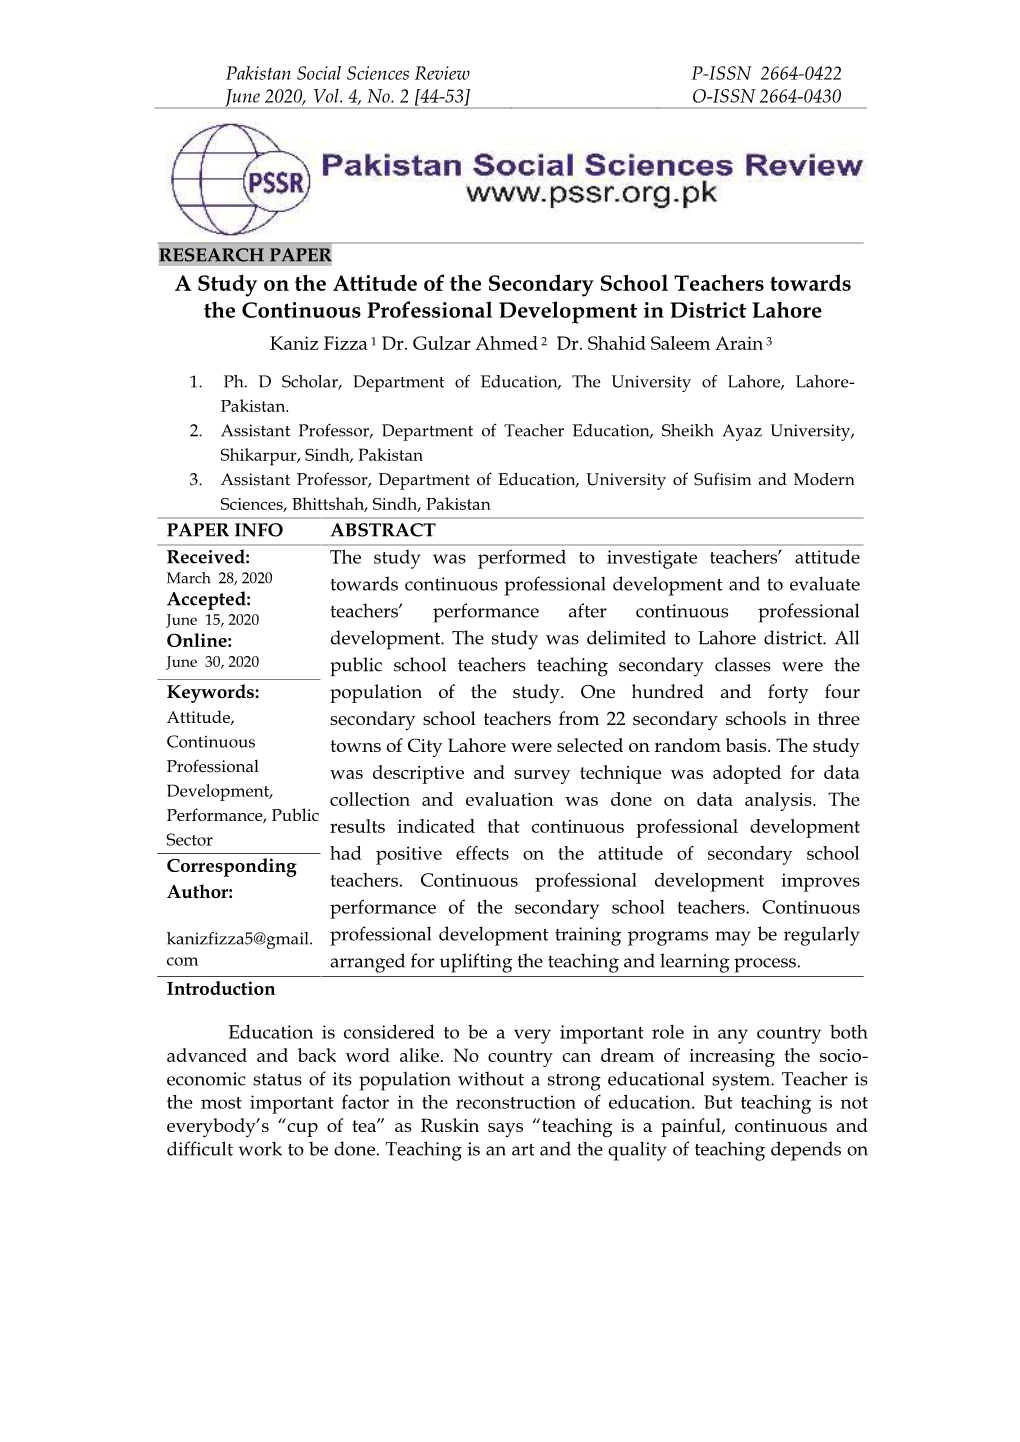 A Study on the Attitude of the Secondary School Teachers Towards the Continuous Professional Development in District Lahore Kaniz Fizza 1 Dr